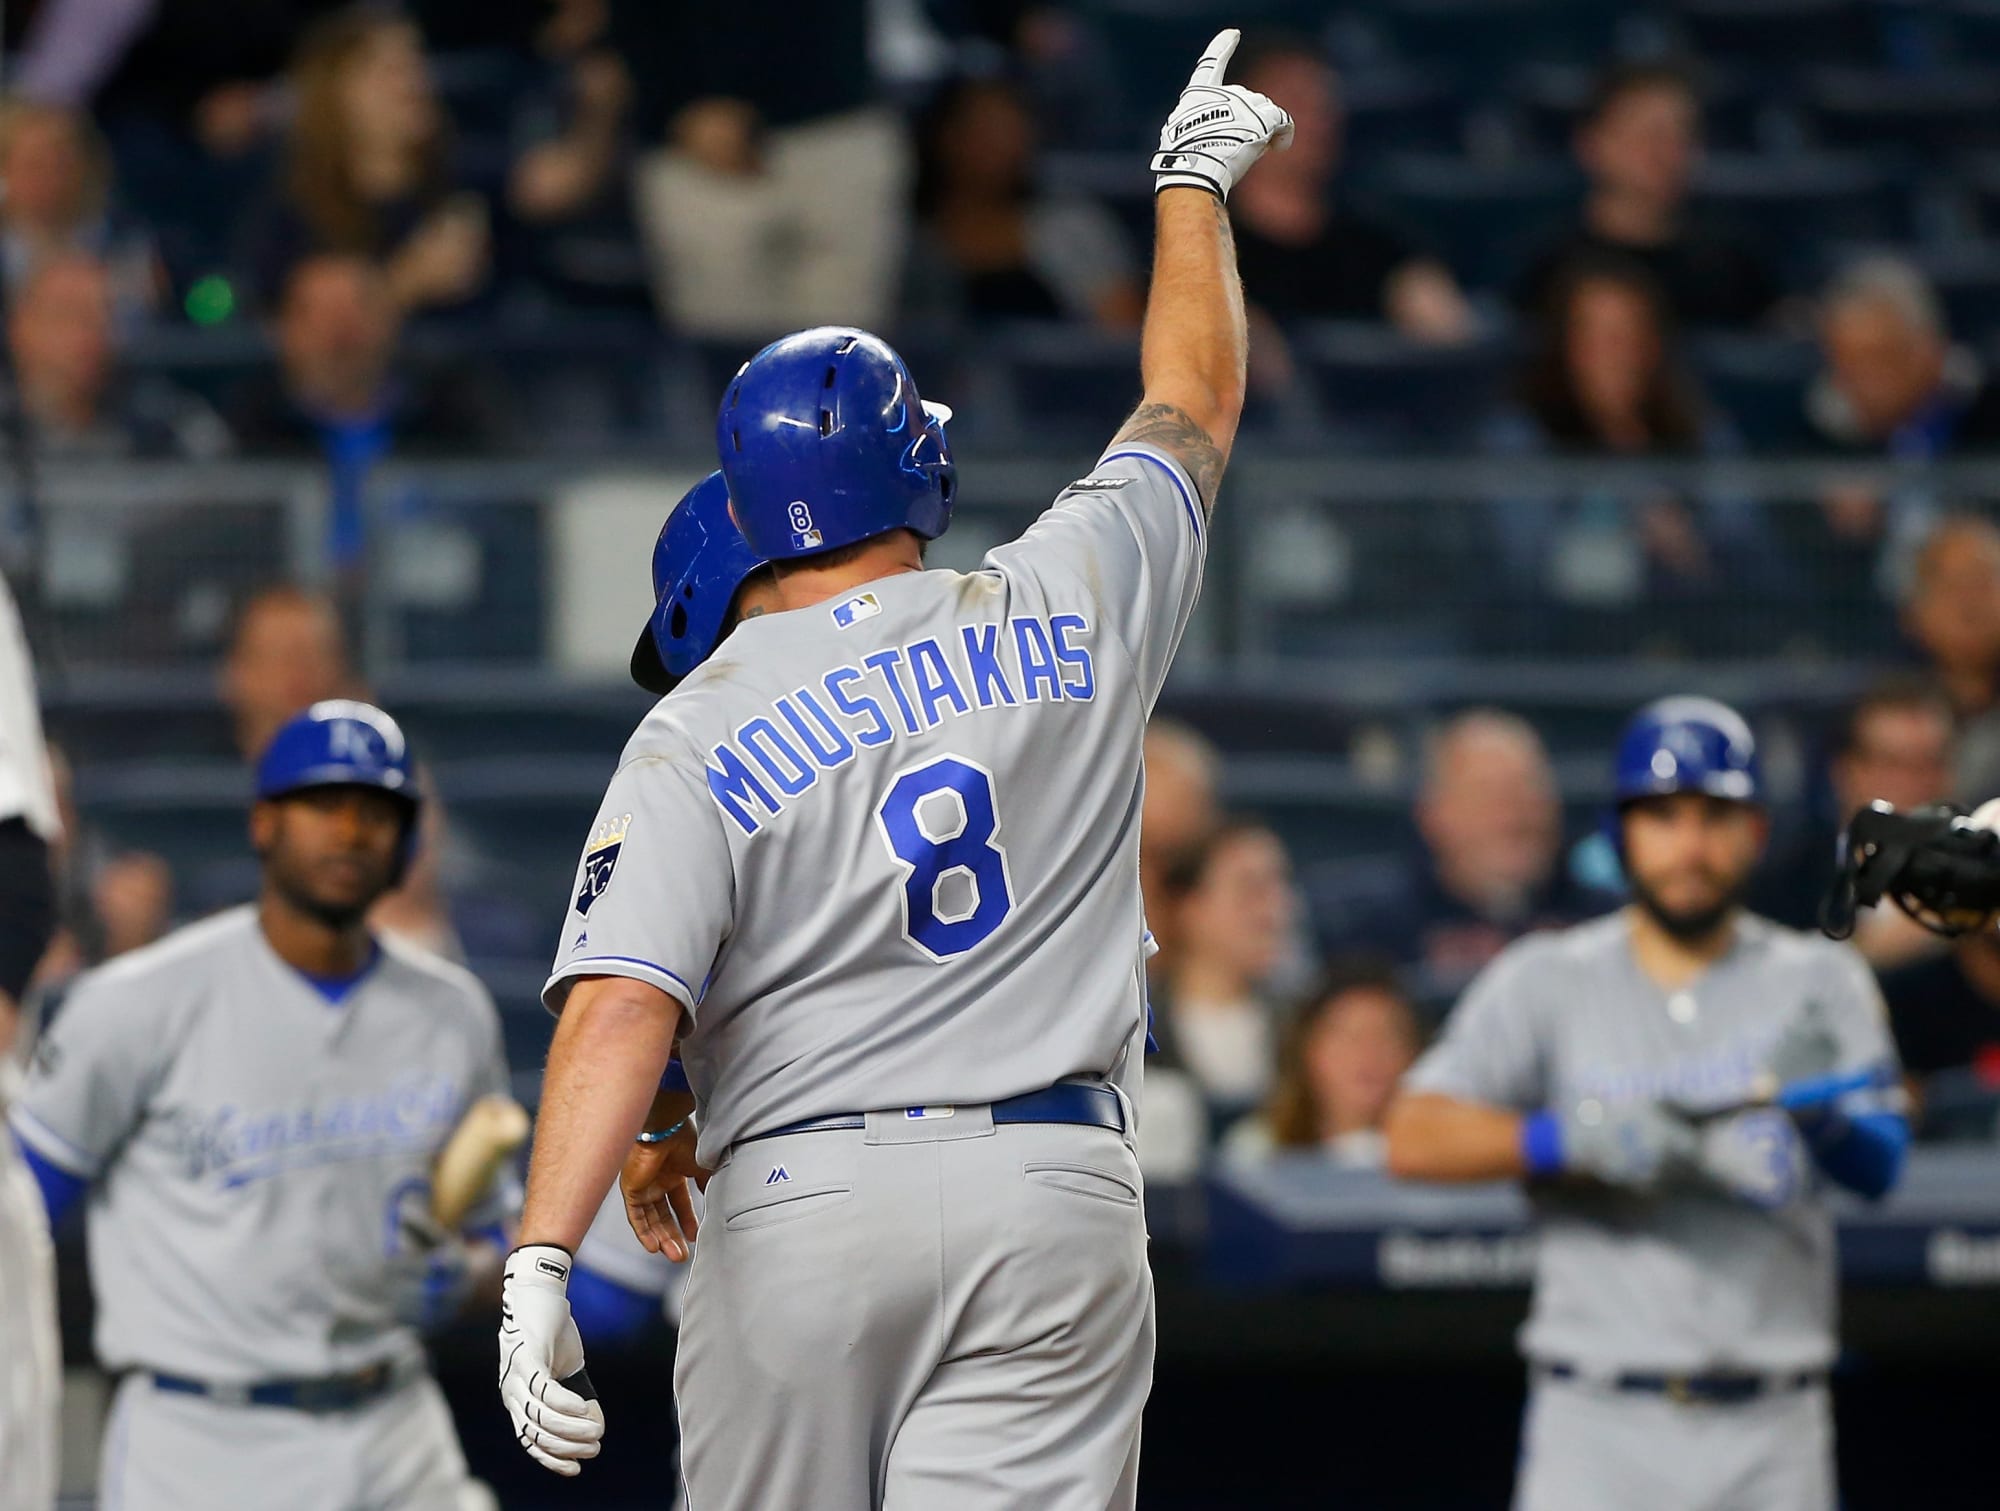 Royals showcase Mike Moustakas for Yankees at 1st base